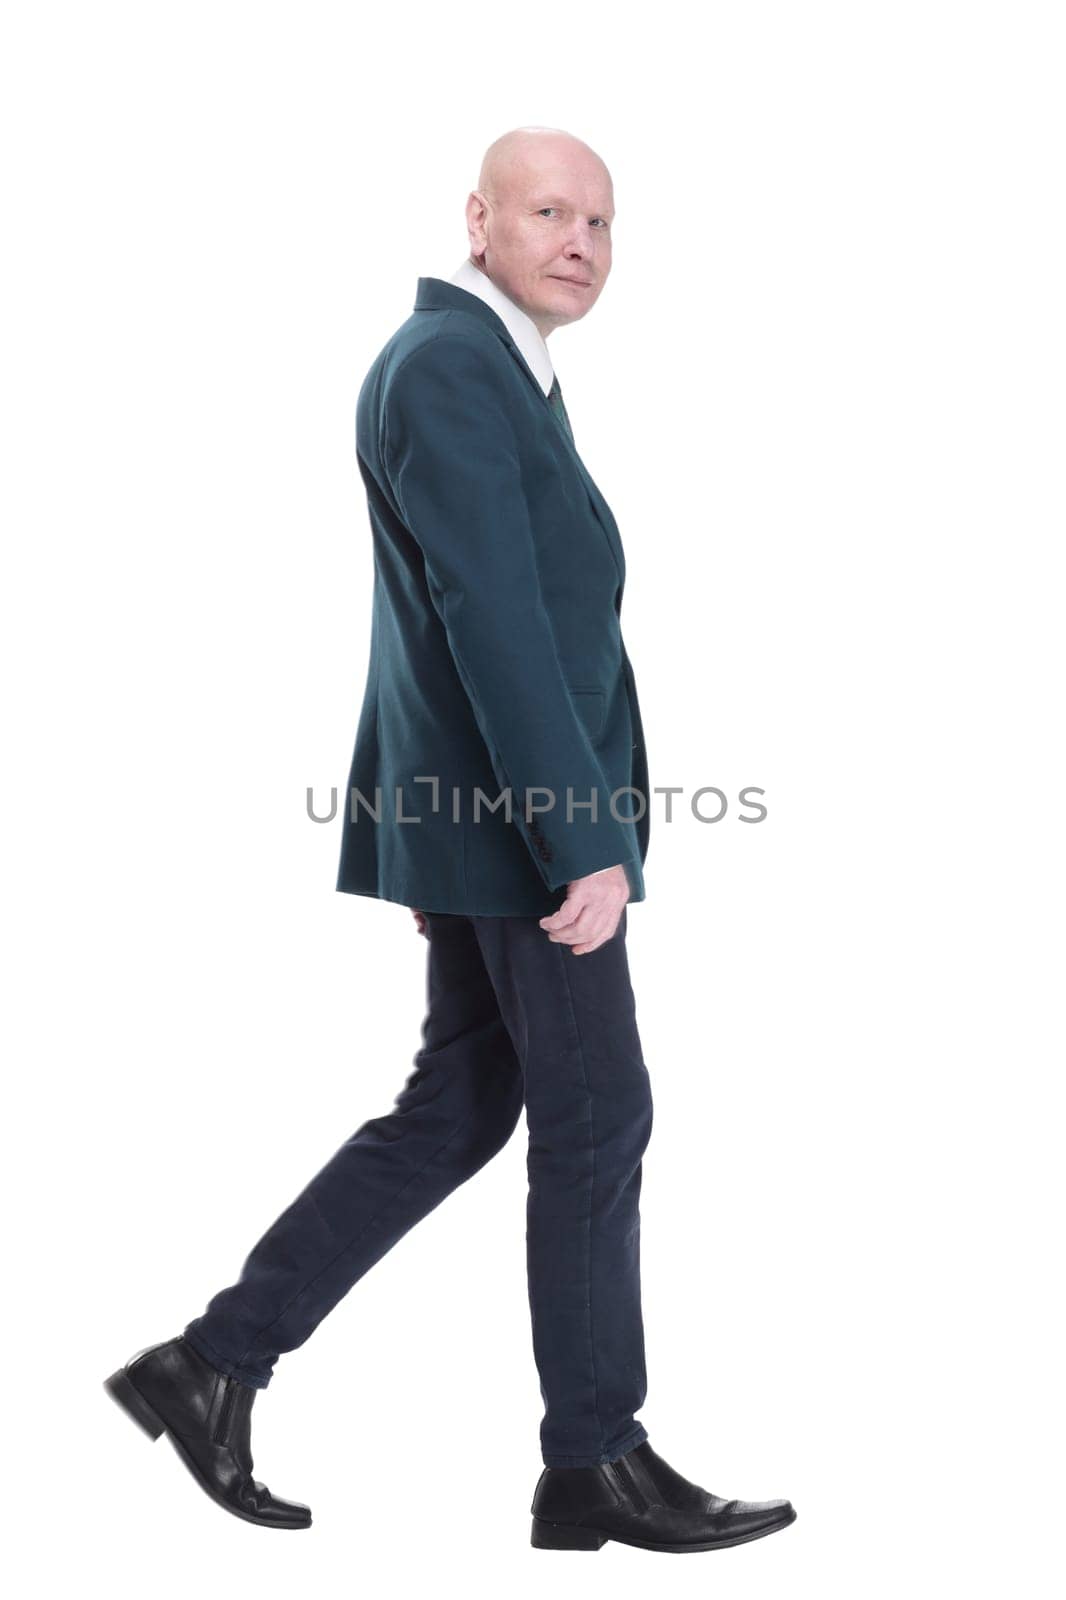 in full growth. Mature business man striding forward. isolated on a white background.